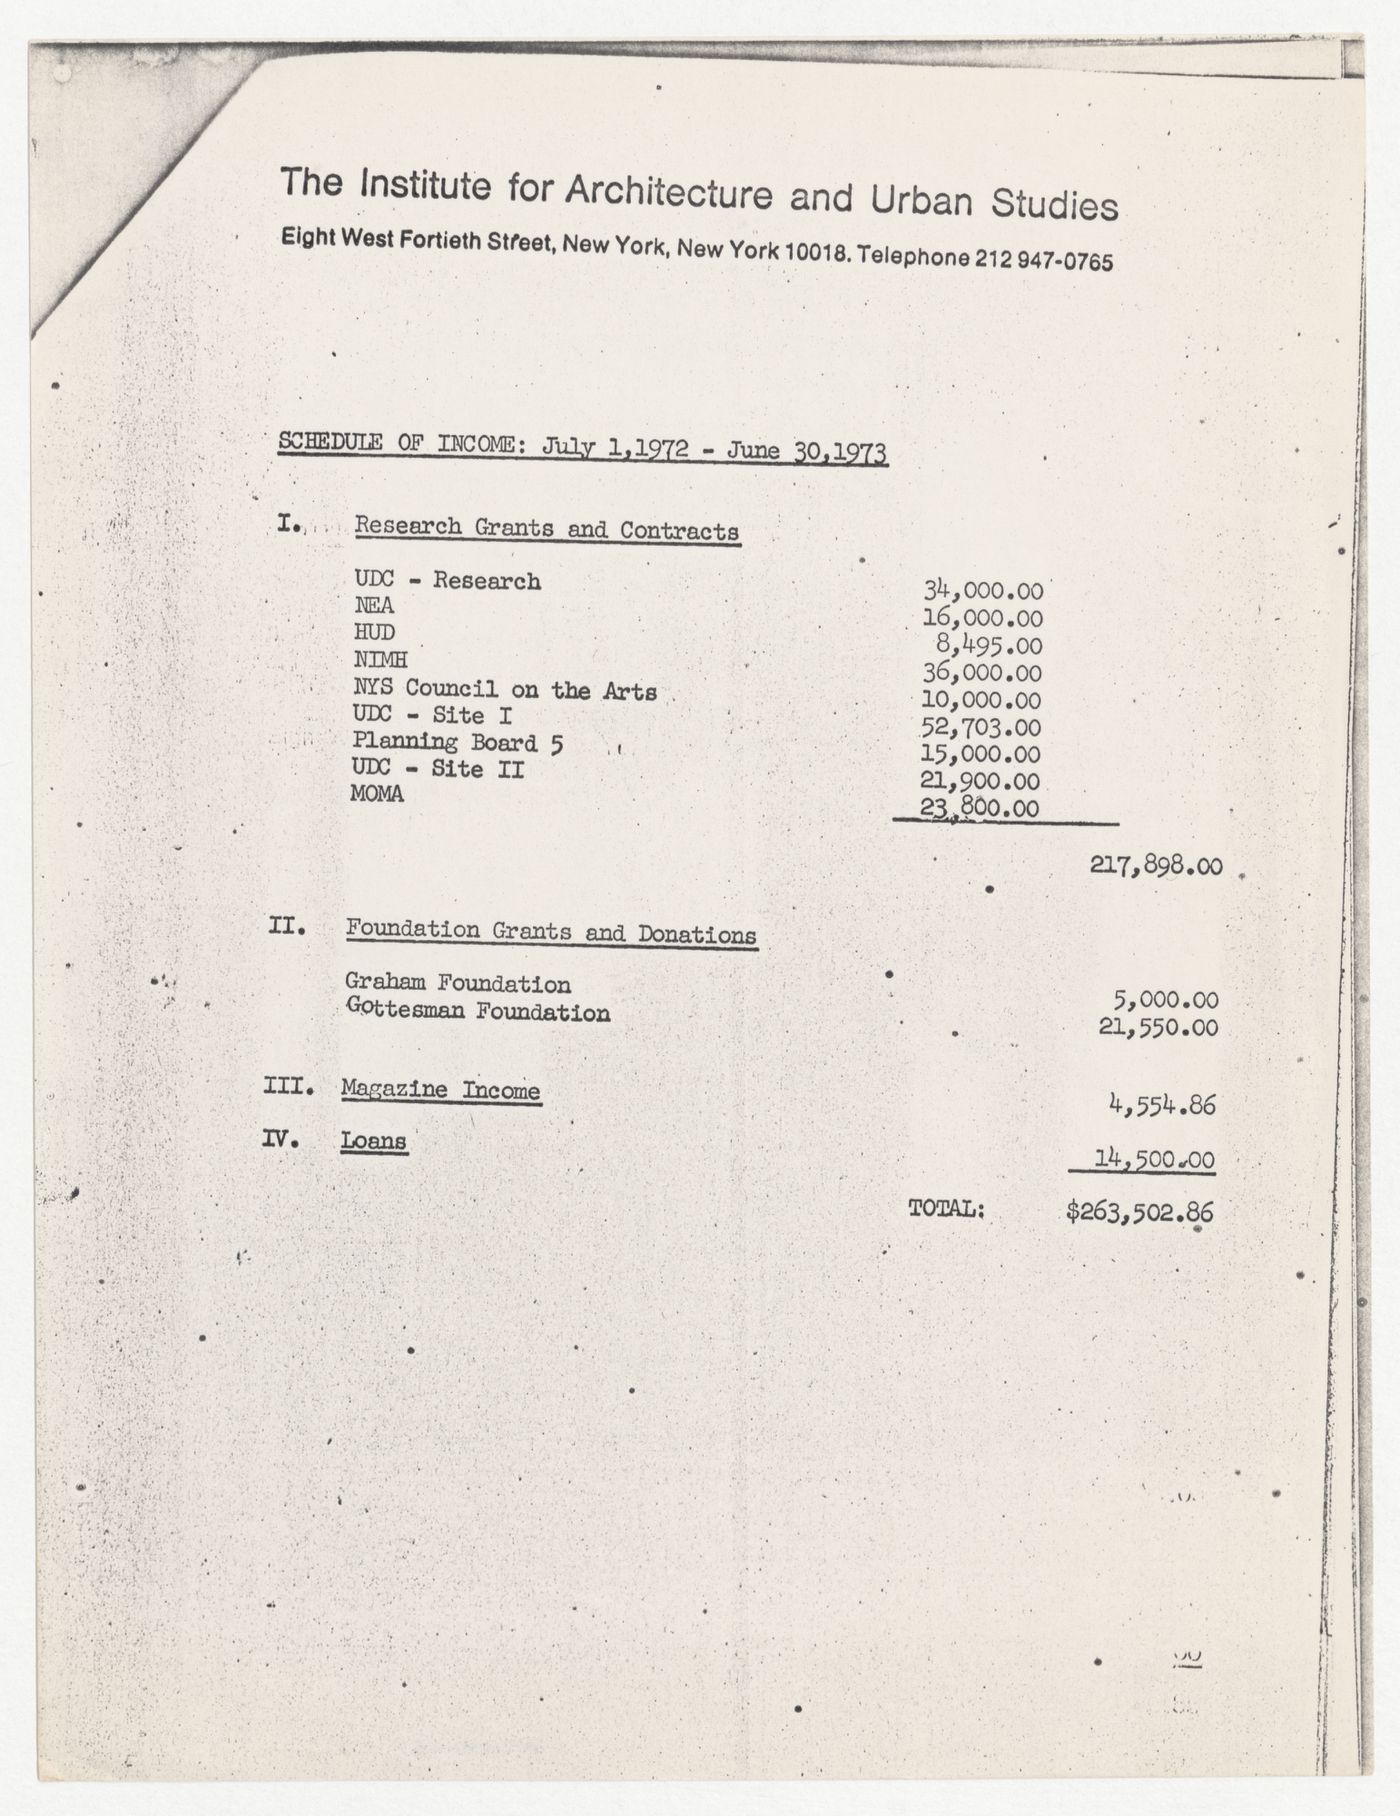 Schedules of income and expenditures from July 1st, 1972 to June 30th, 1973